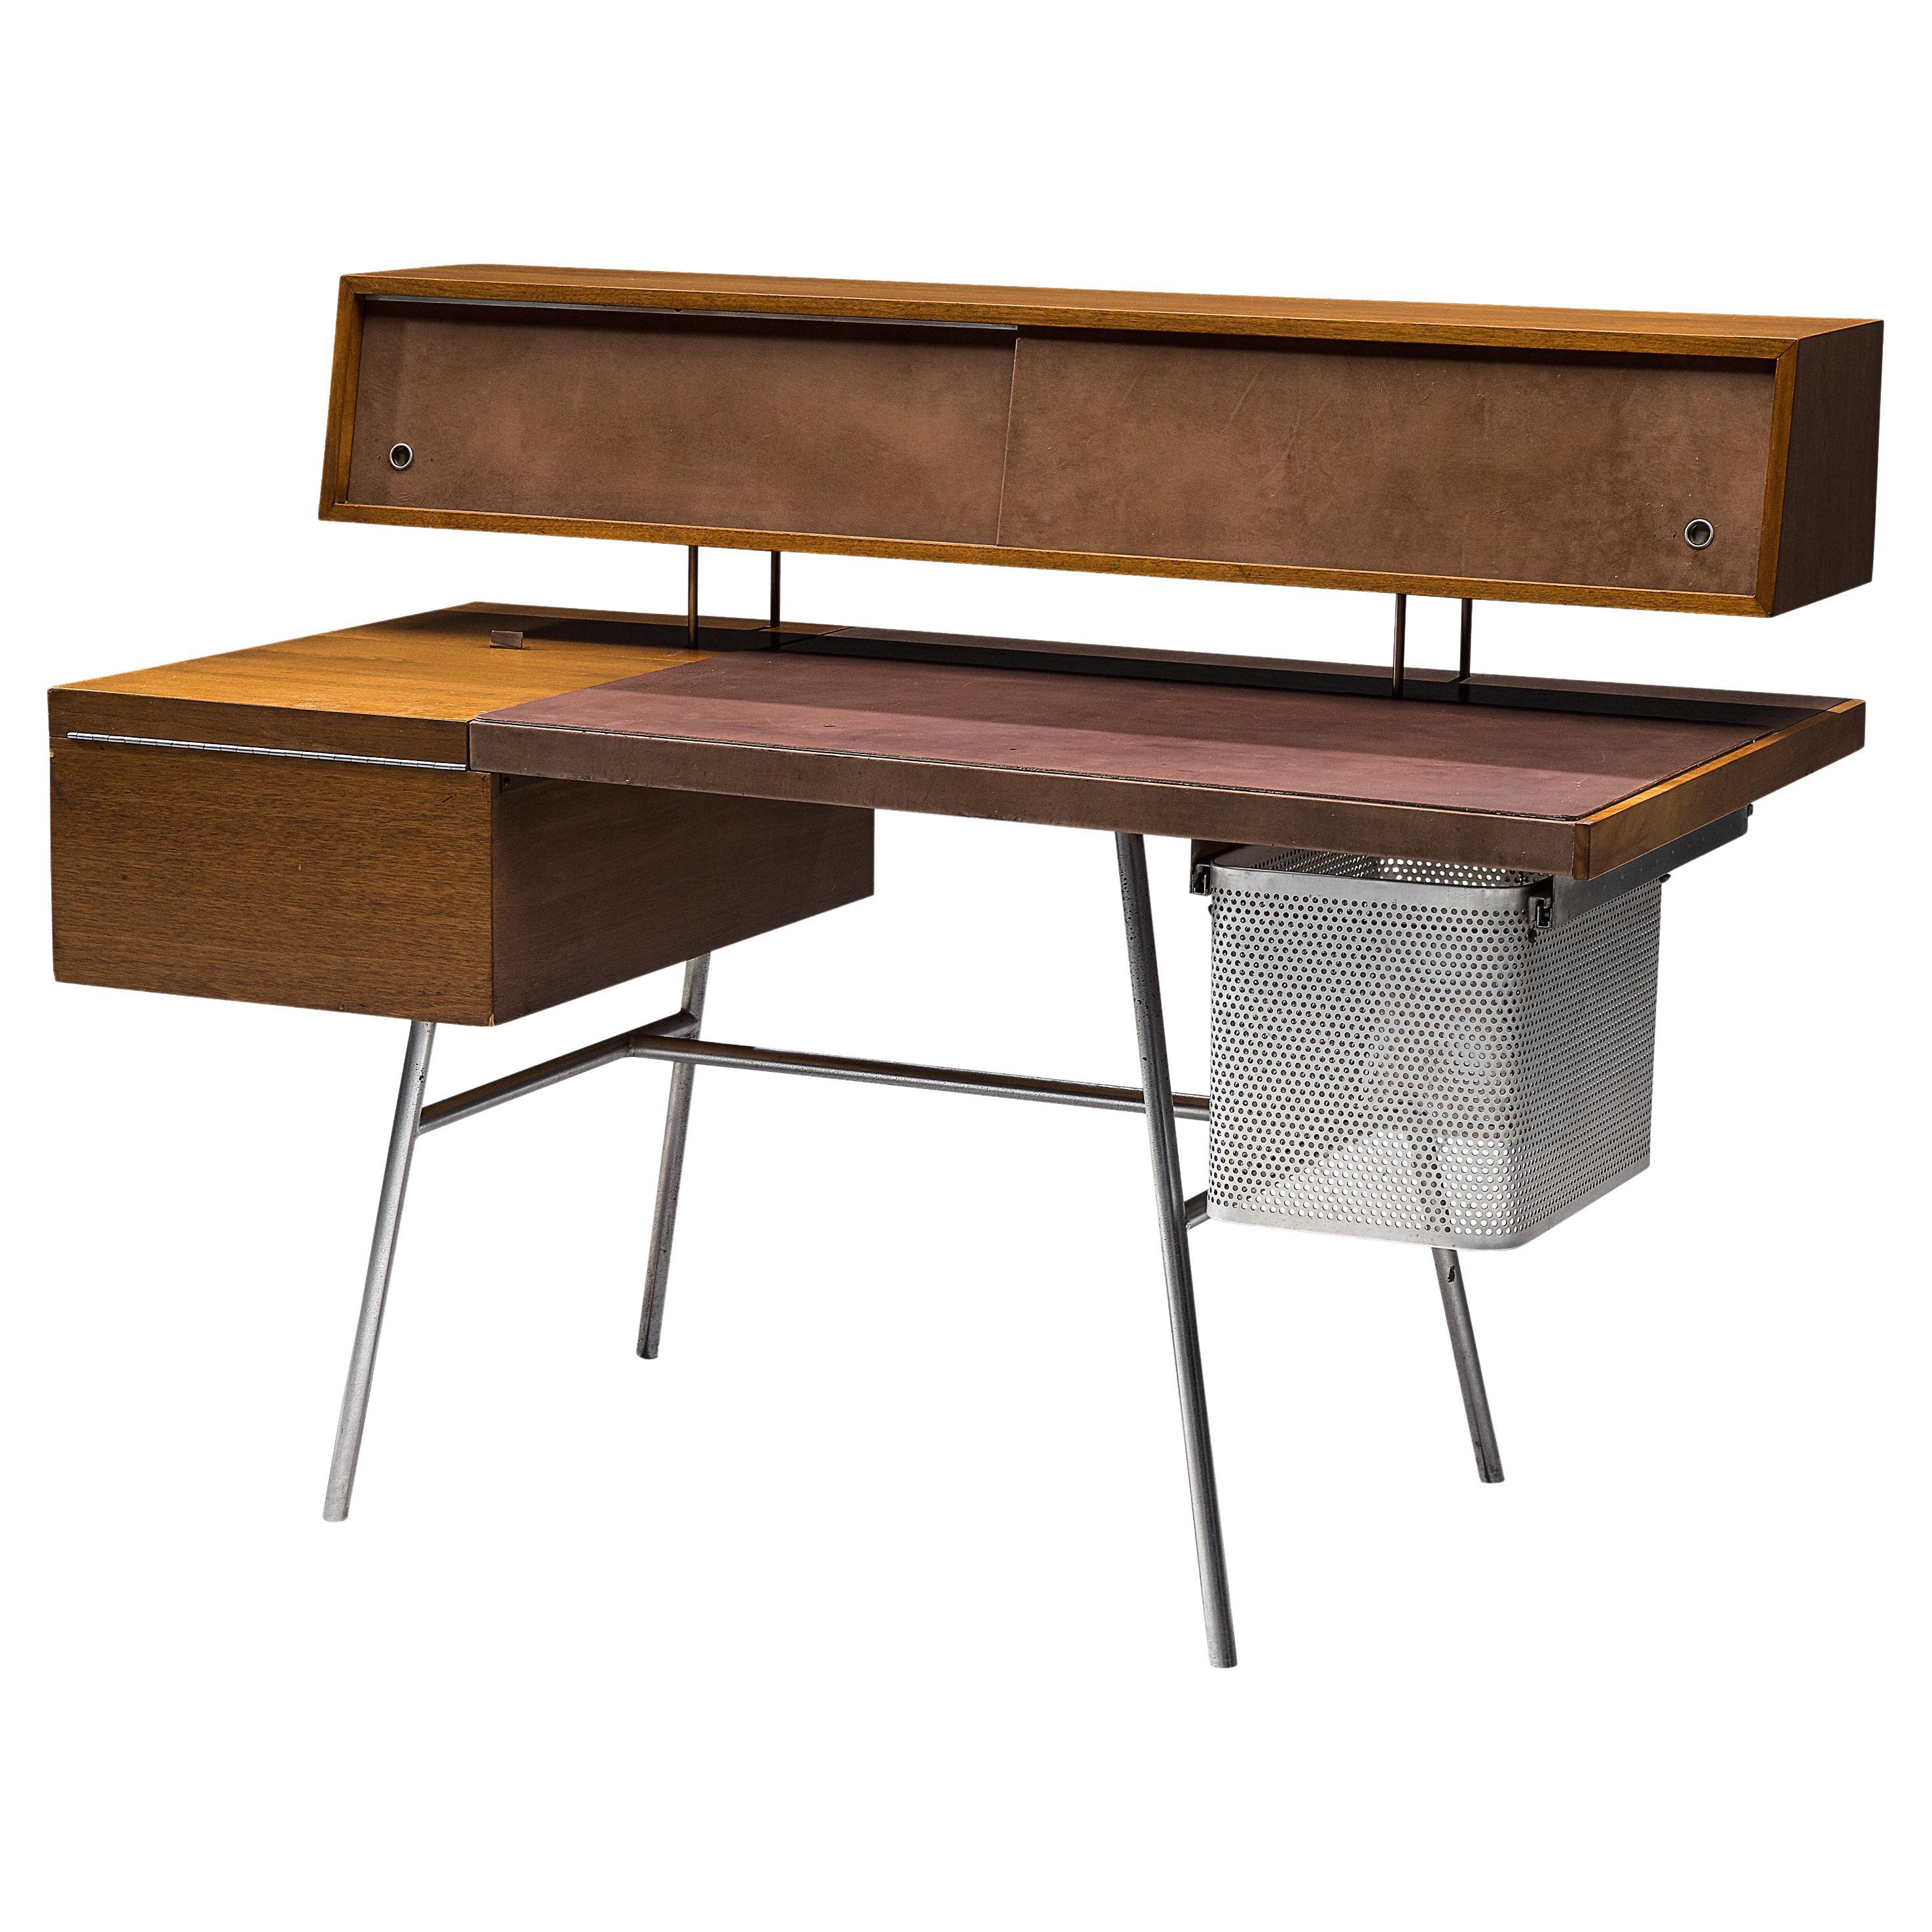 George Nelson for H. Miller '4658' Desk in Walnut, Leather and Steel